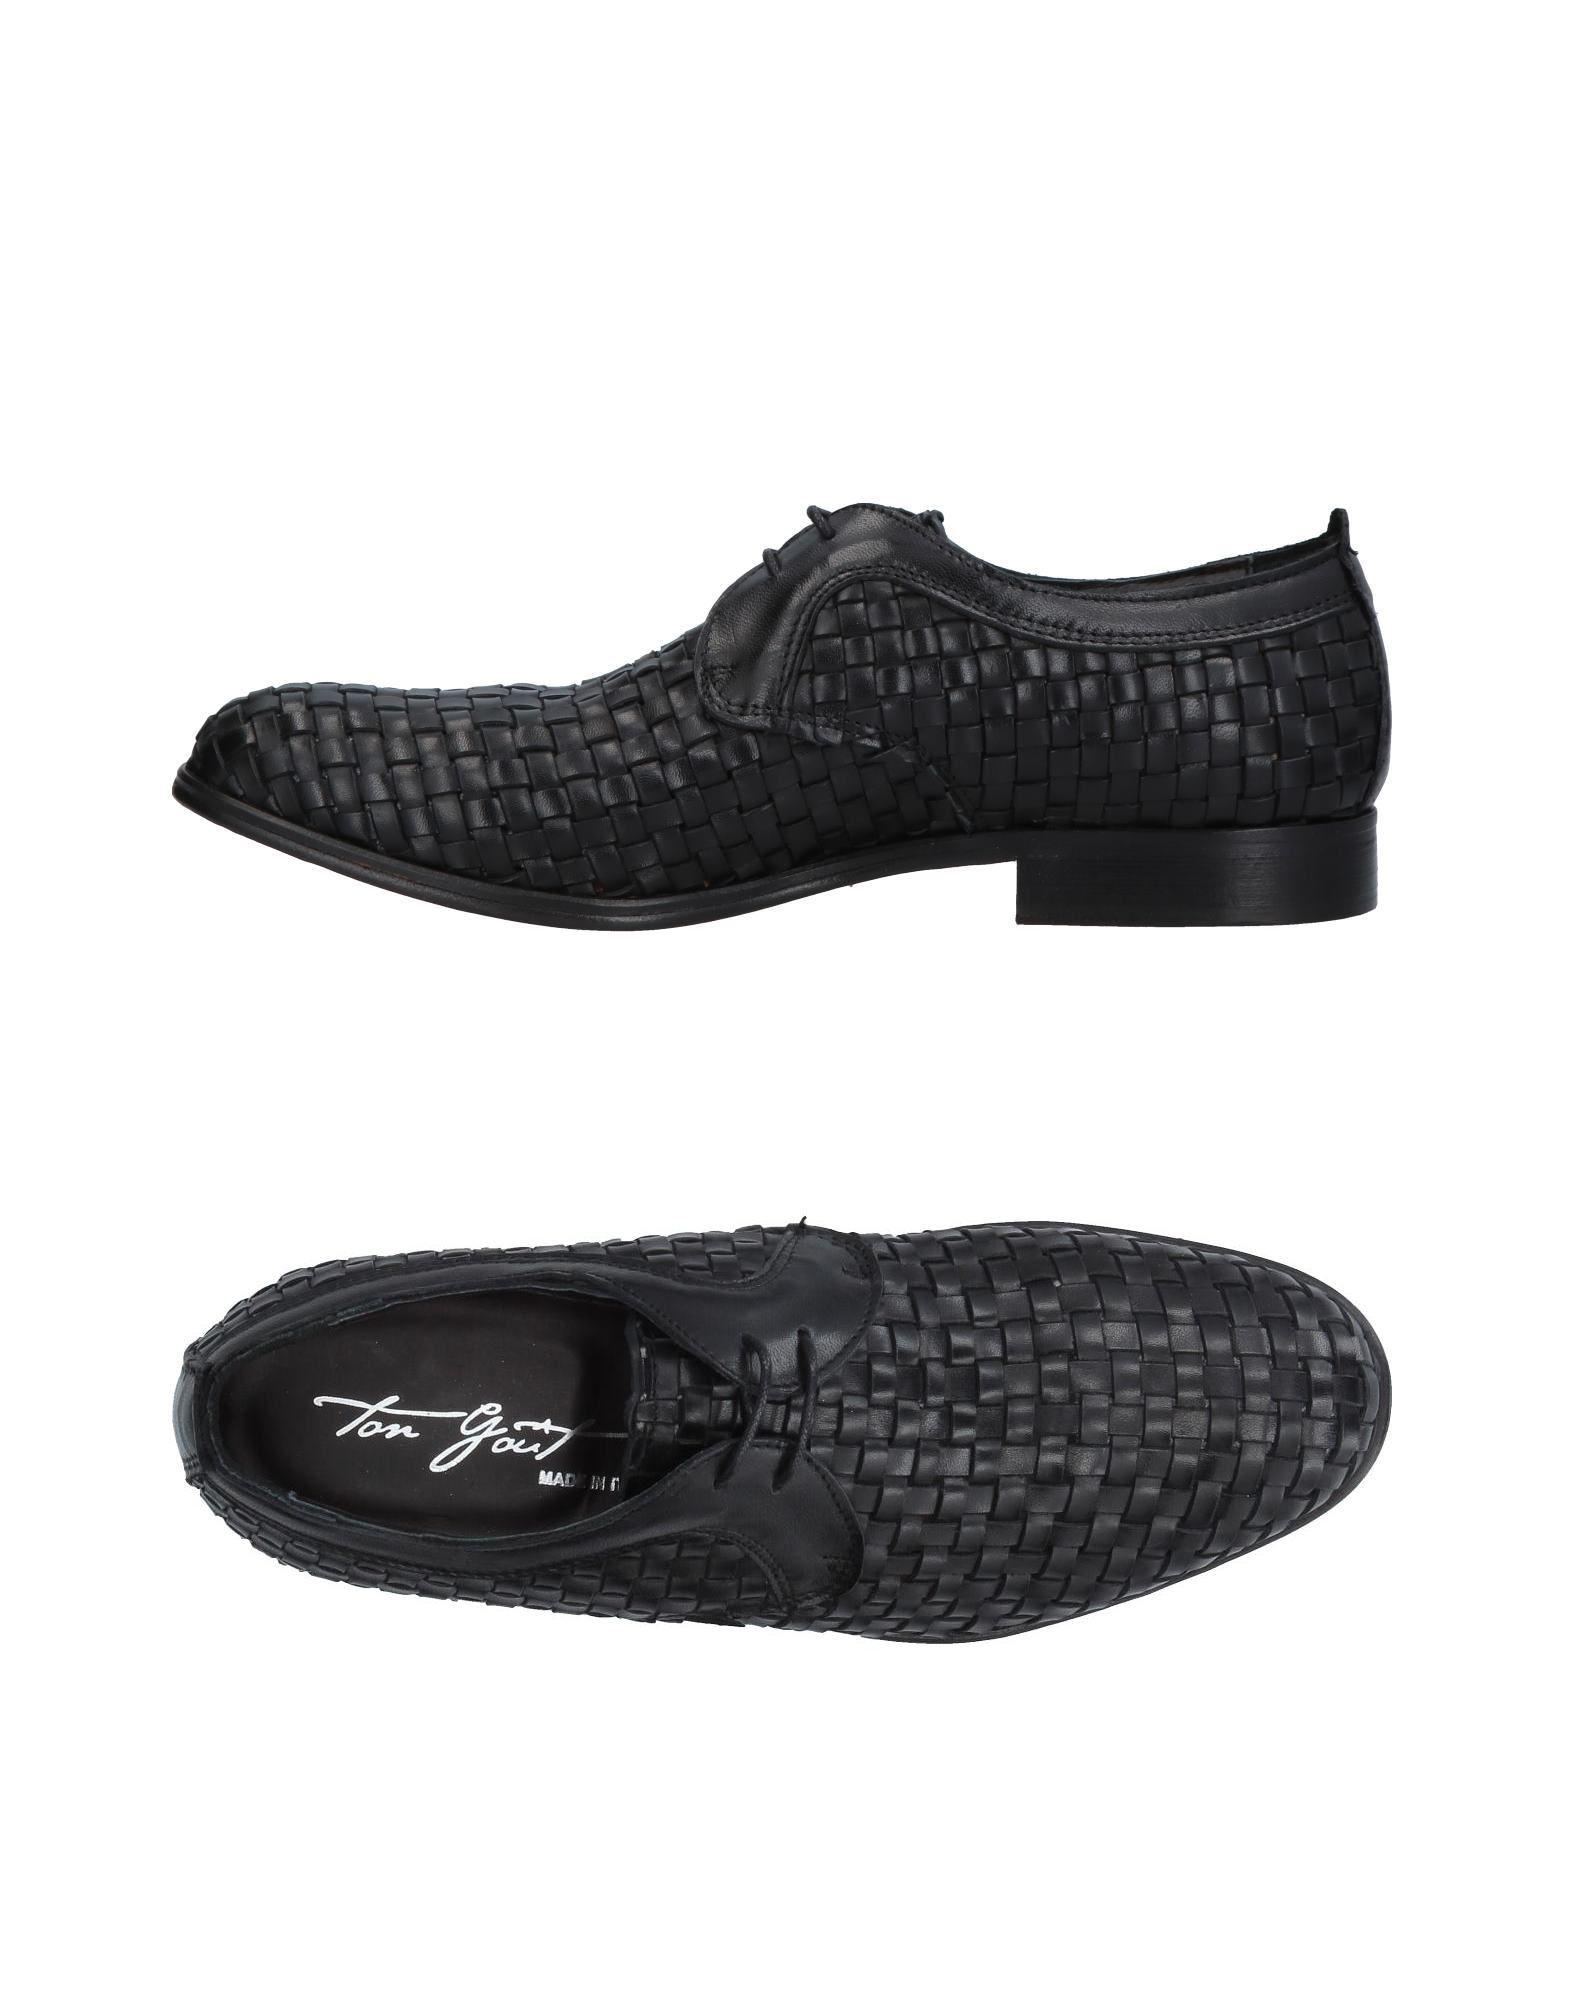 TON GOÛT Leather Lace-up Shoe in Black for Men - Lyst